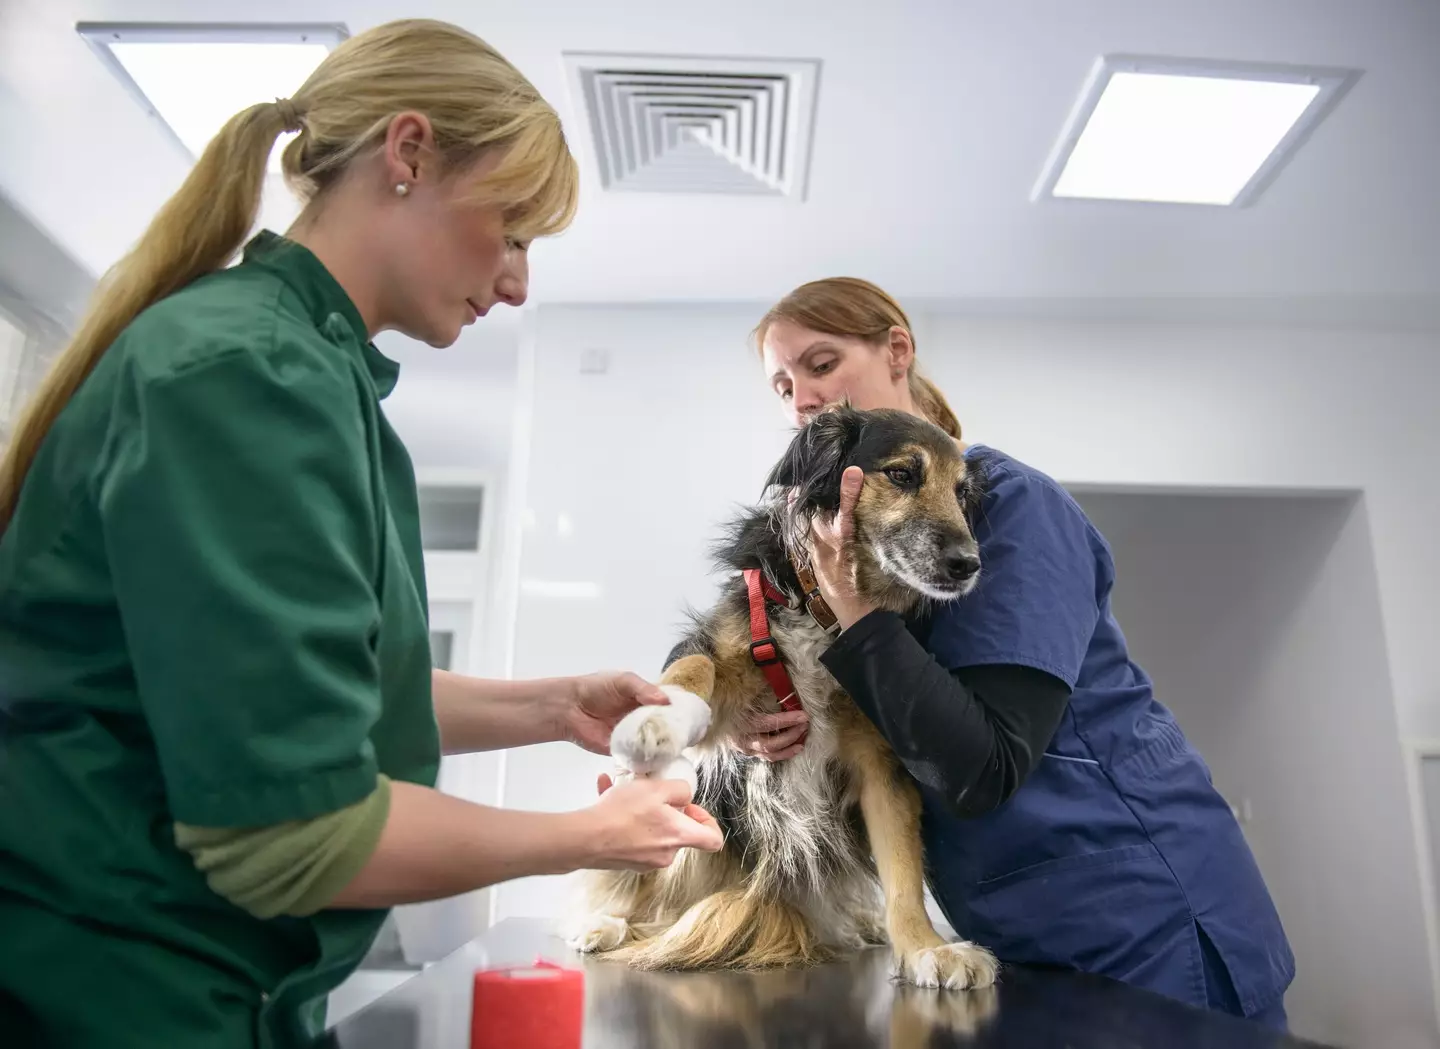 A dog being held by a nurse while the veterinarian inspects it.